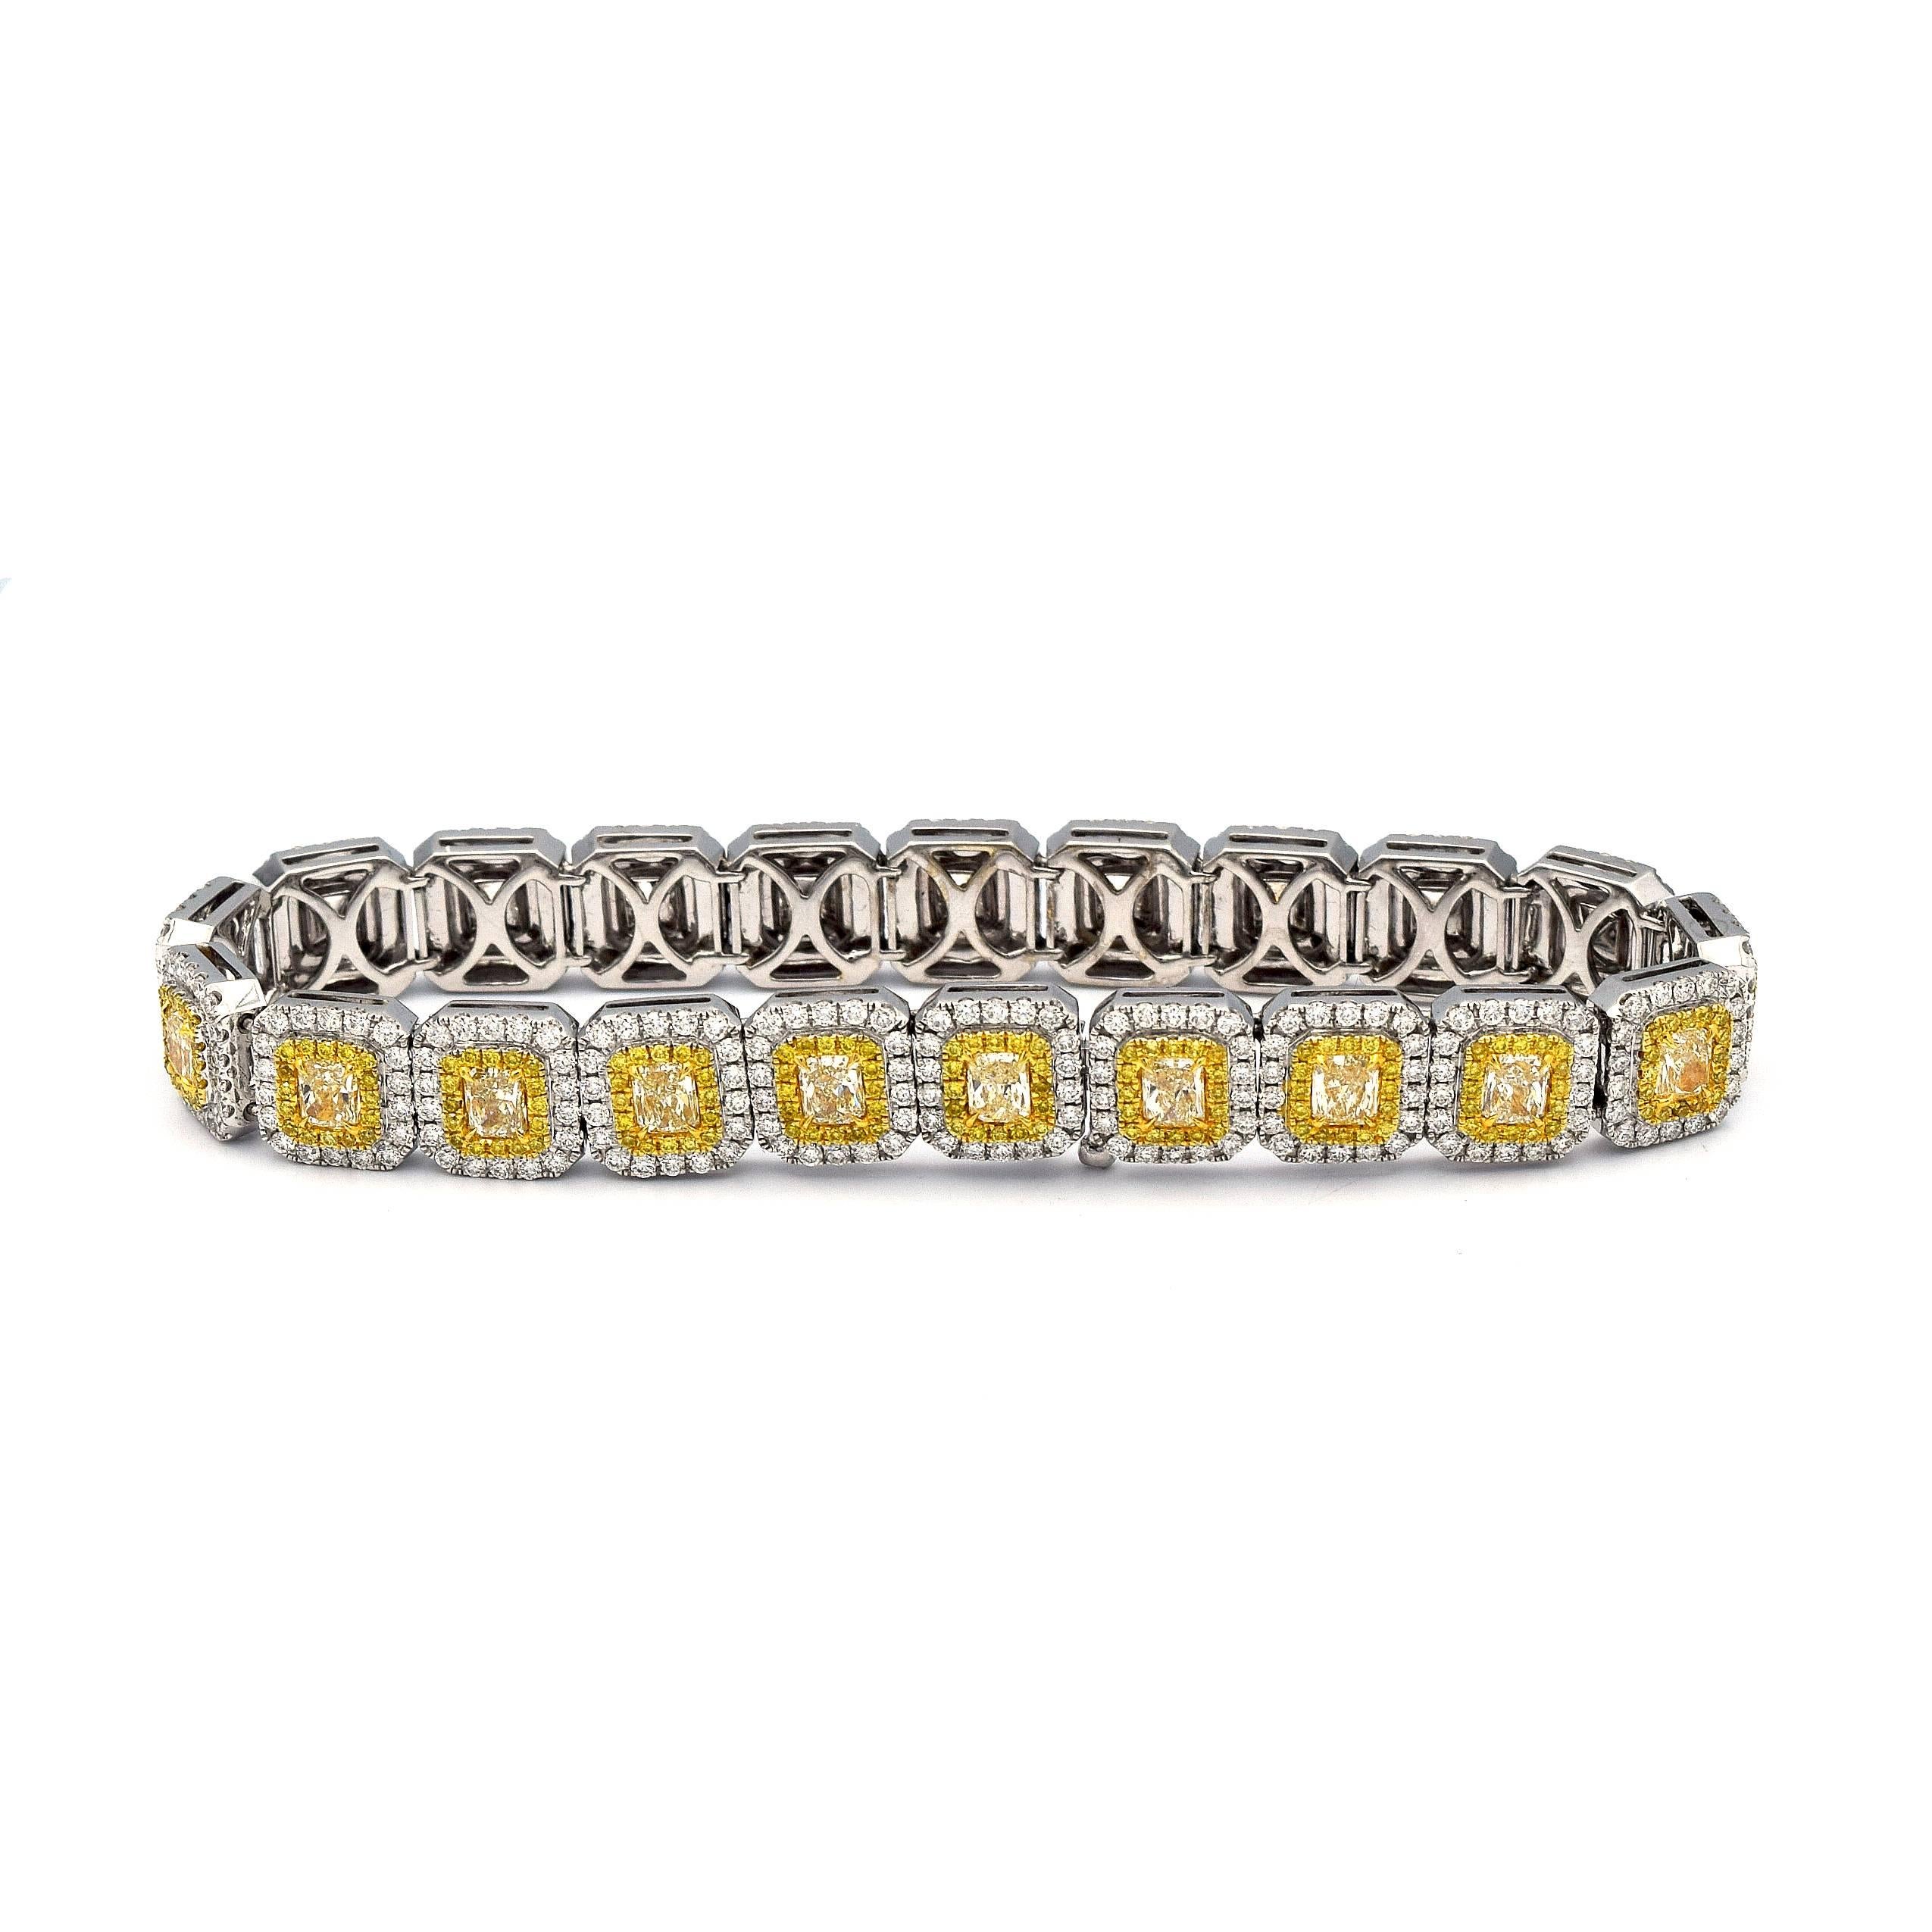 This stunning Tennis Bracelet consisting of 21 Radiant Fancy Yellow Diamonds, with Pave White and Yellow Diamonds, give this bracelet a total caret weight of 5.36ct. 

Mounted in 18K White Gold, giving this bracelet a weight of 33.22 grams.